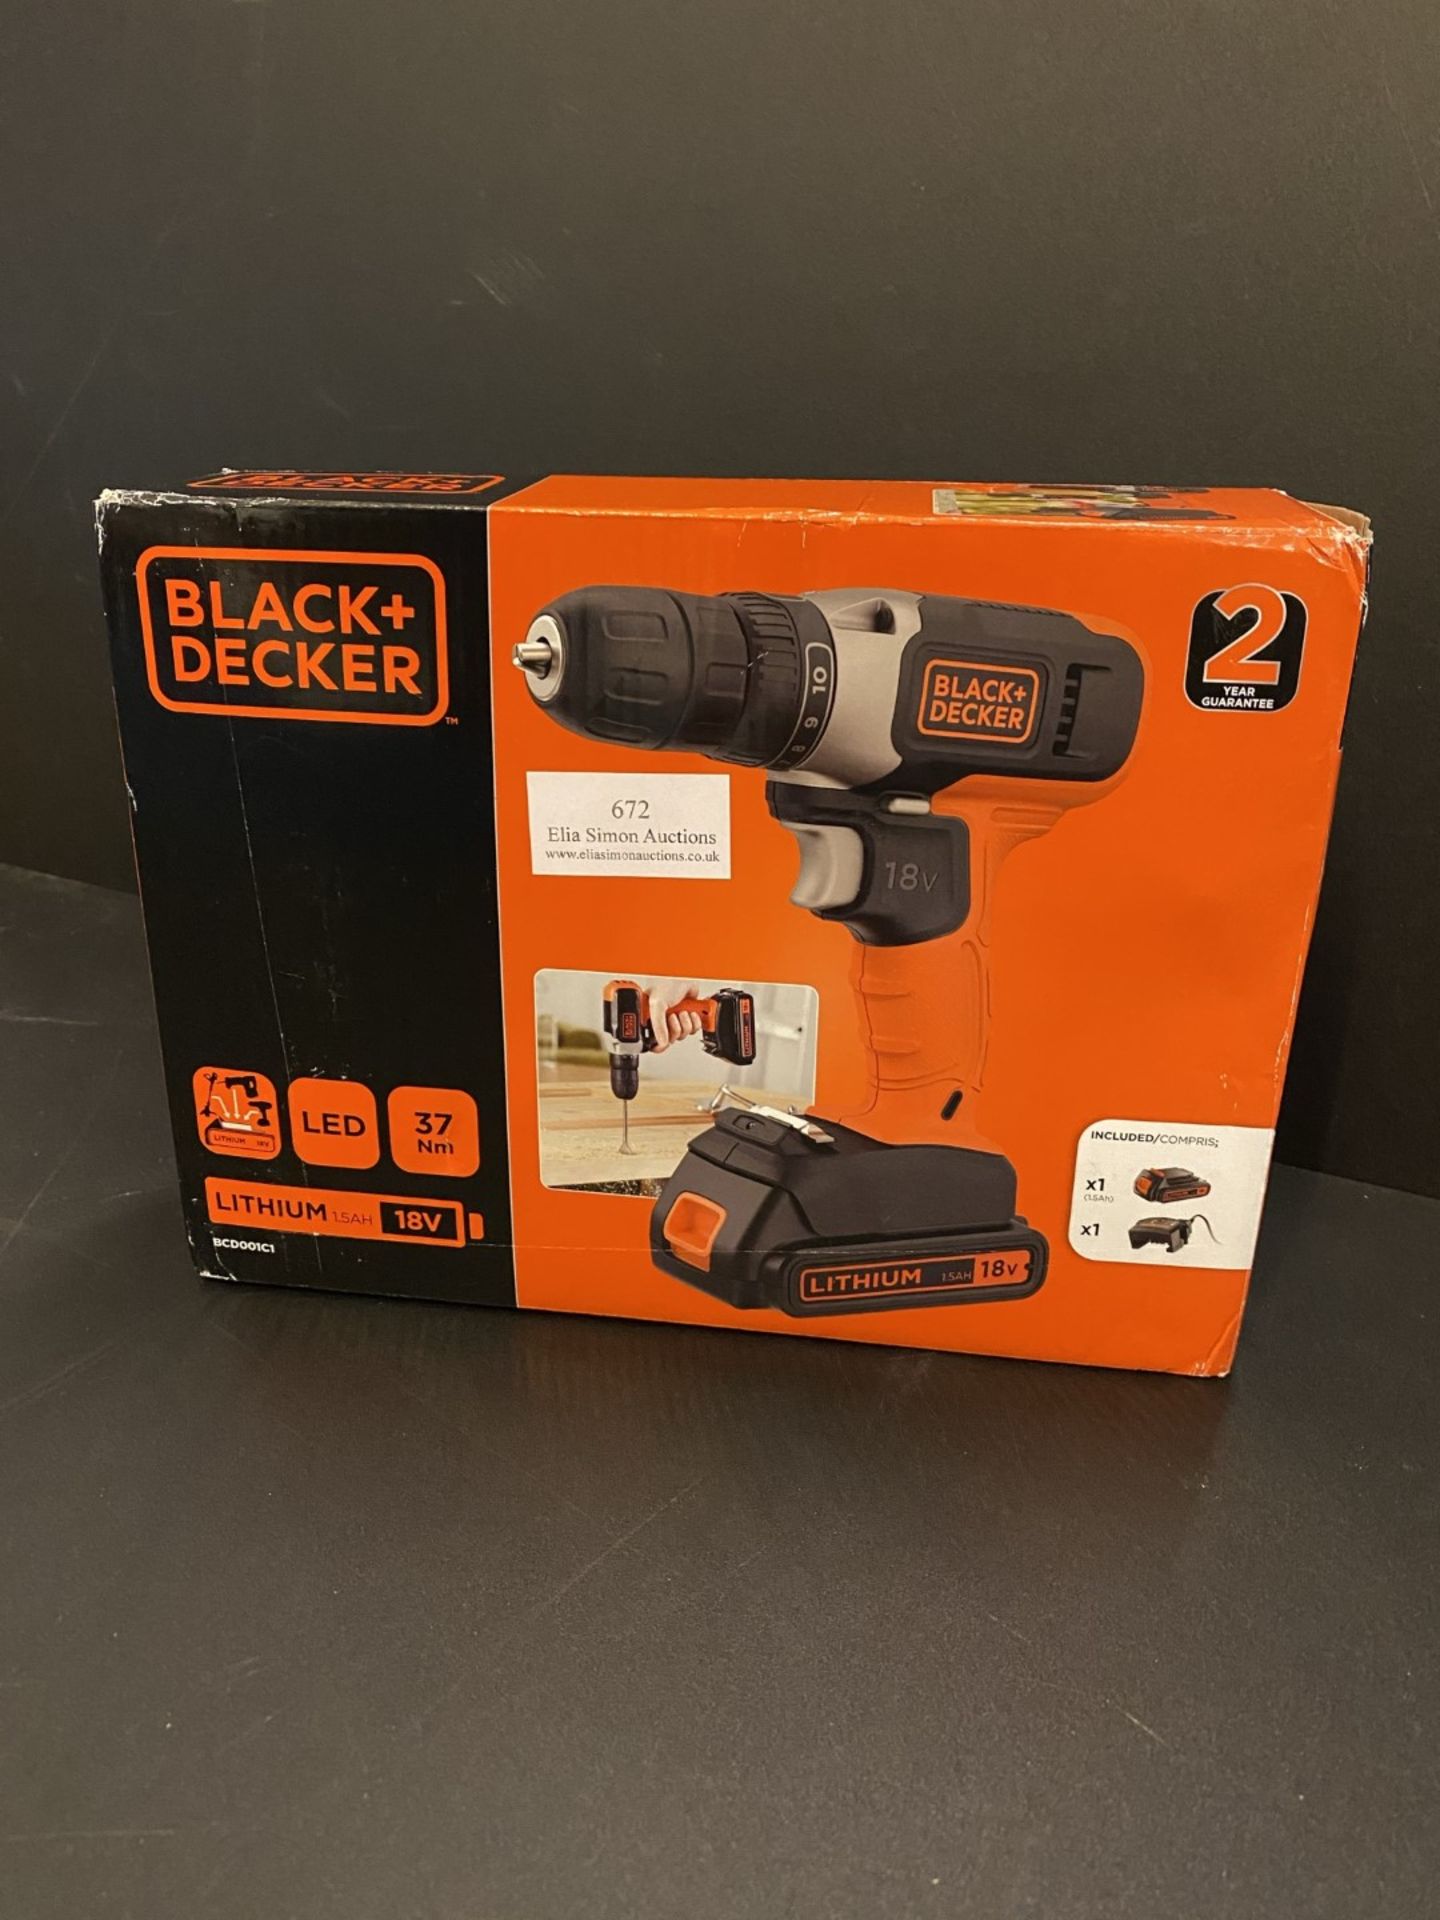 RRP £65 BLACK+DECKER 18 V Cordless Drill Driver with 10 Torque Settings, 1.5 Ah Lithium-Ion Battery, - Image 2 of 2